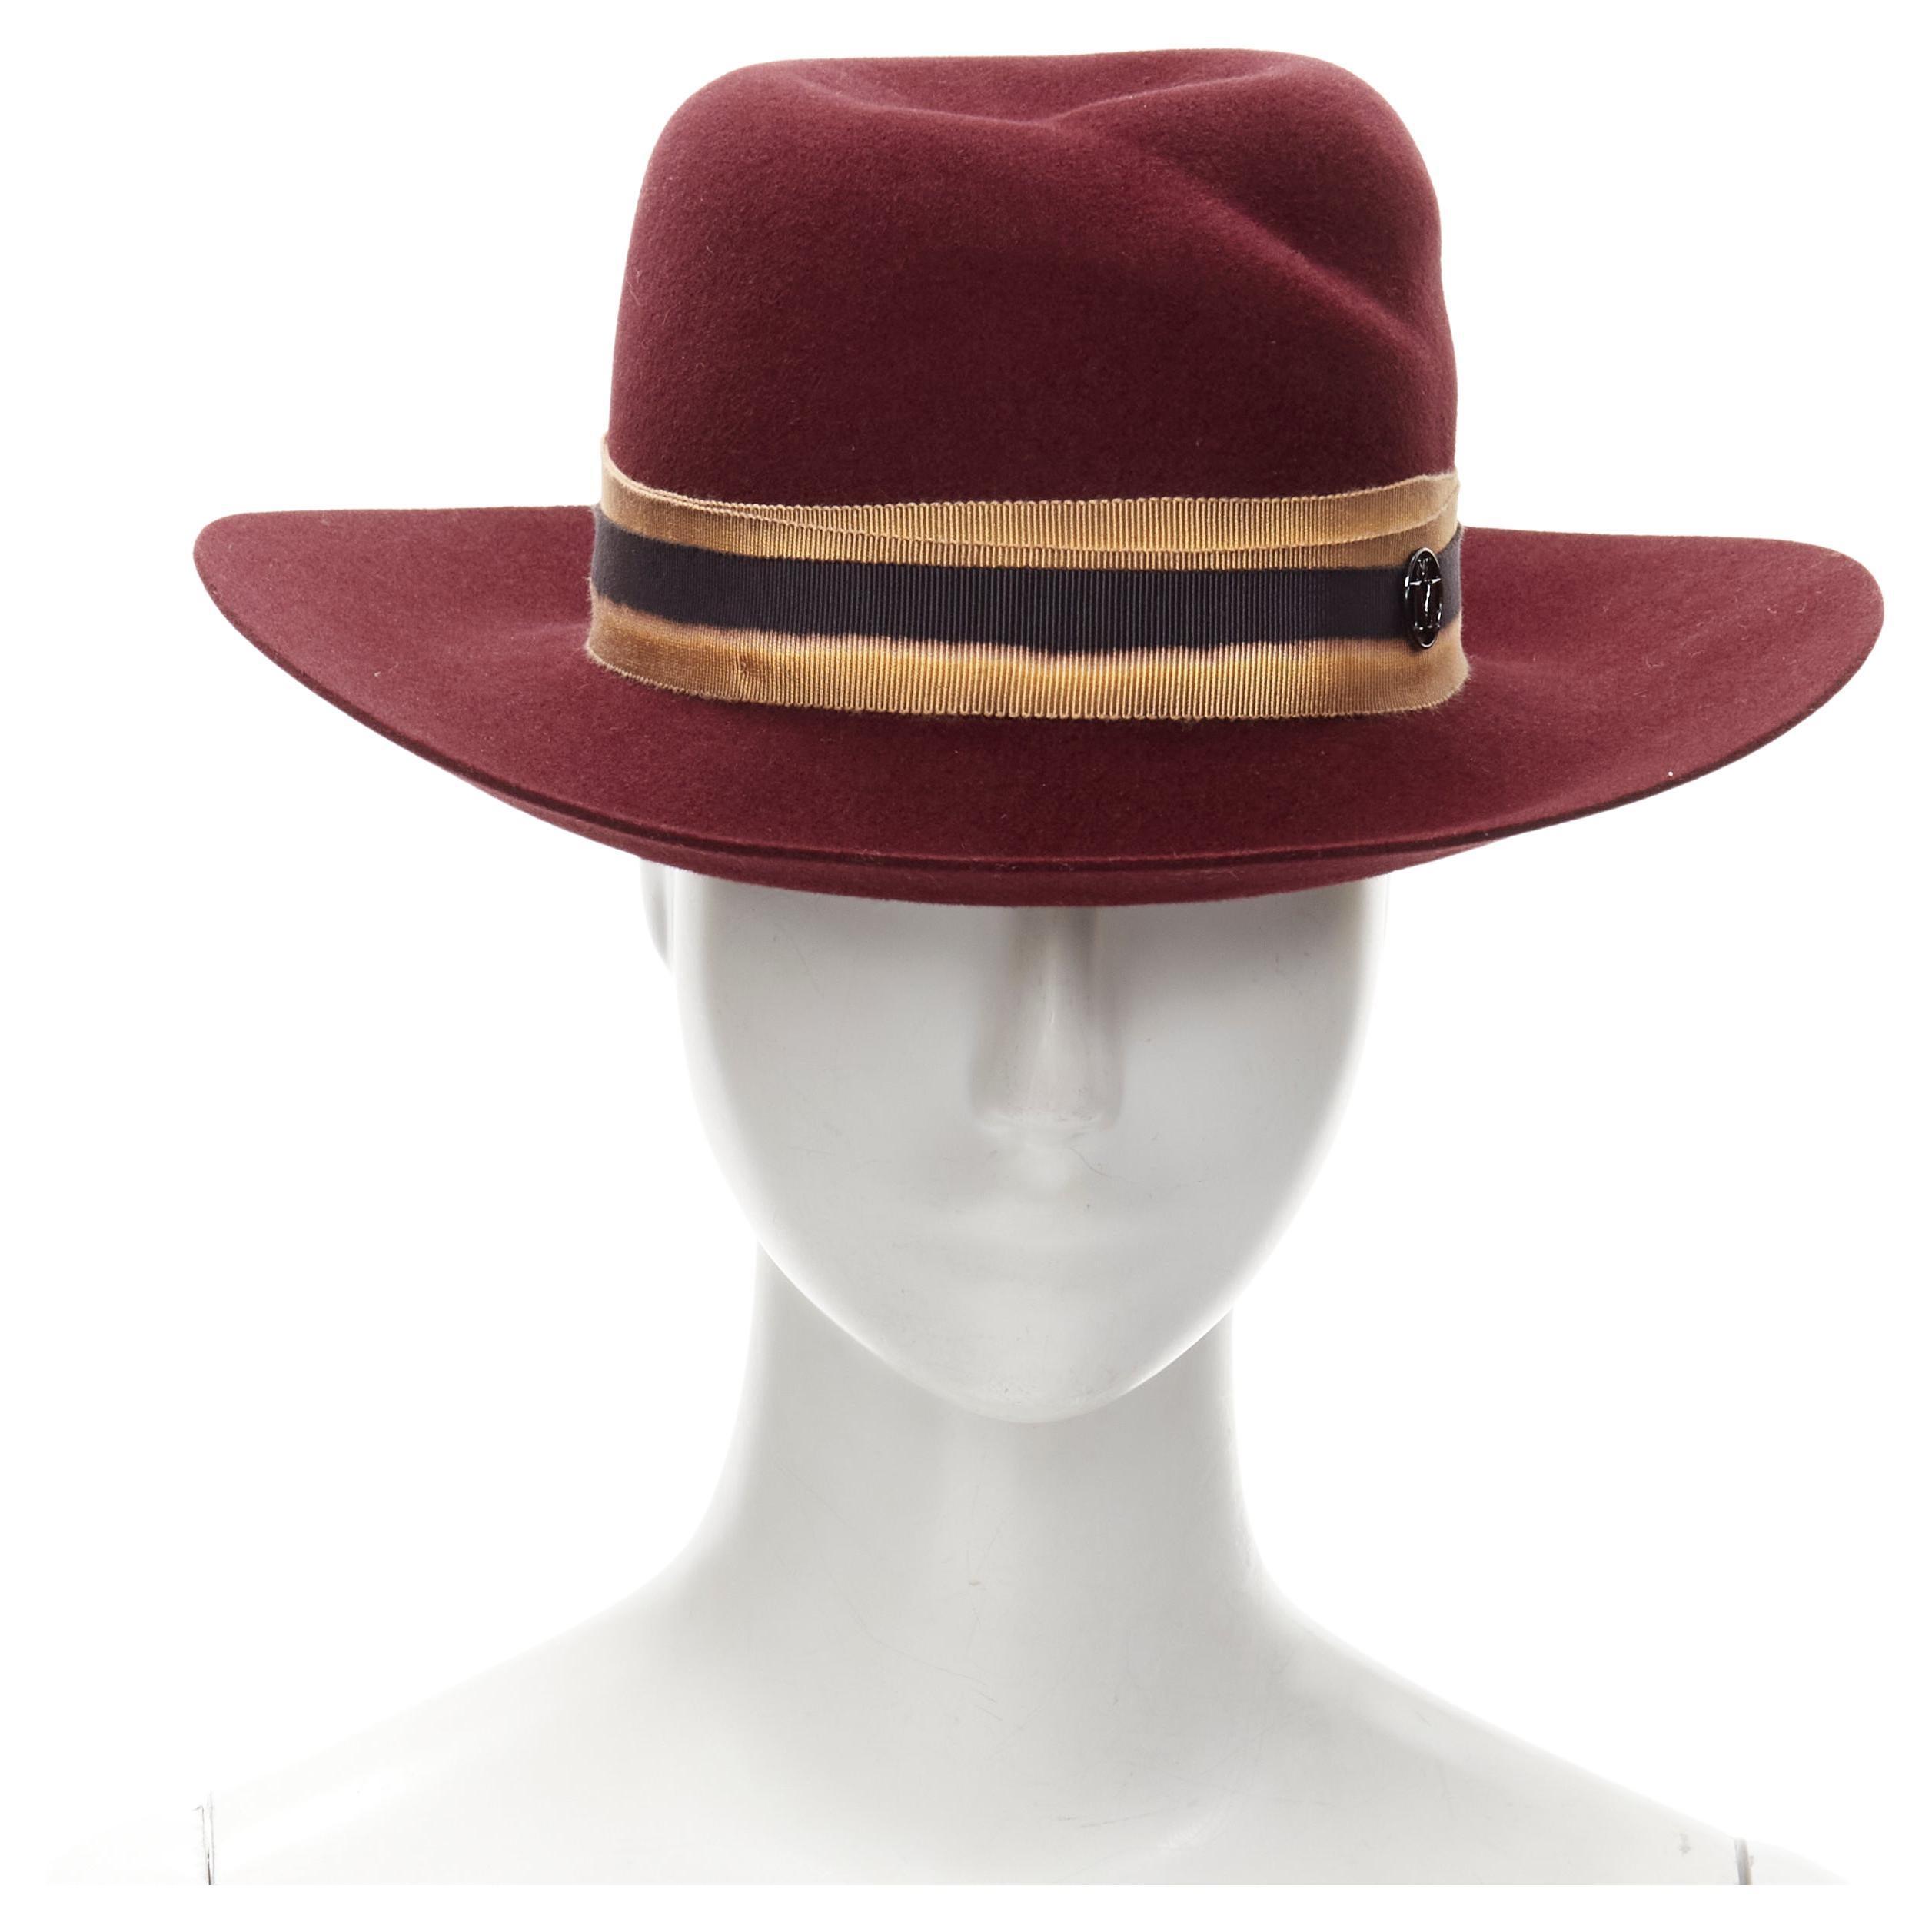 What is a fedora-style hat?